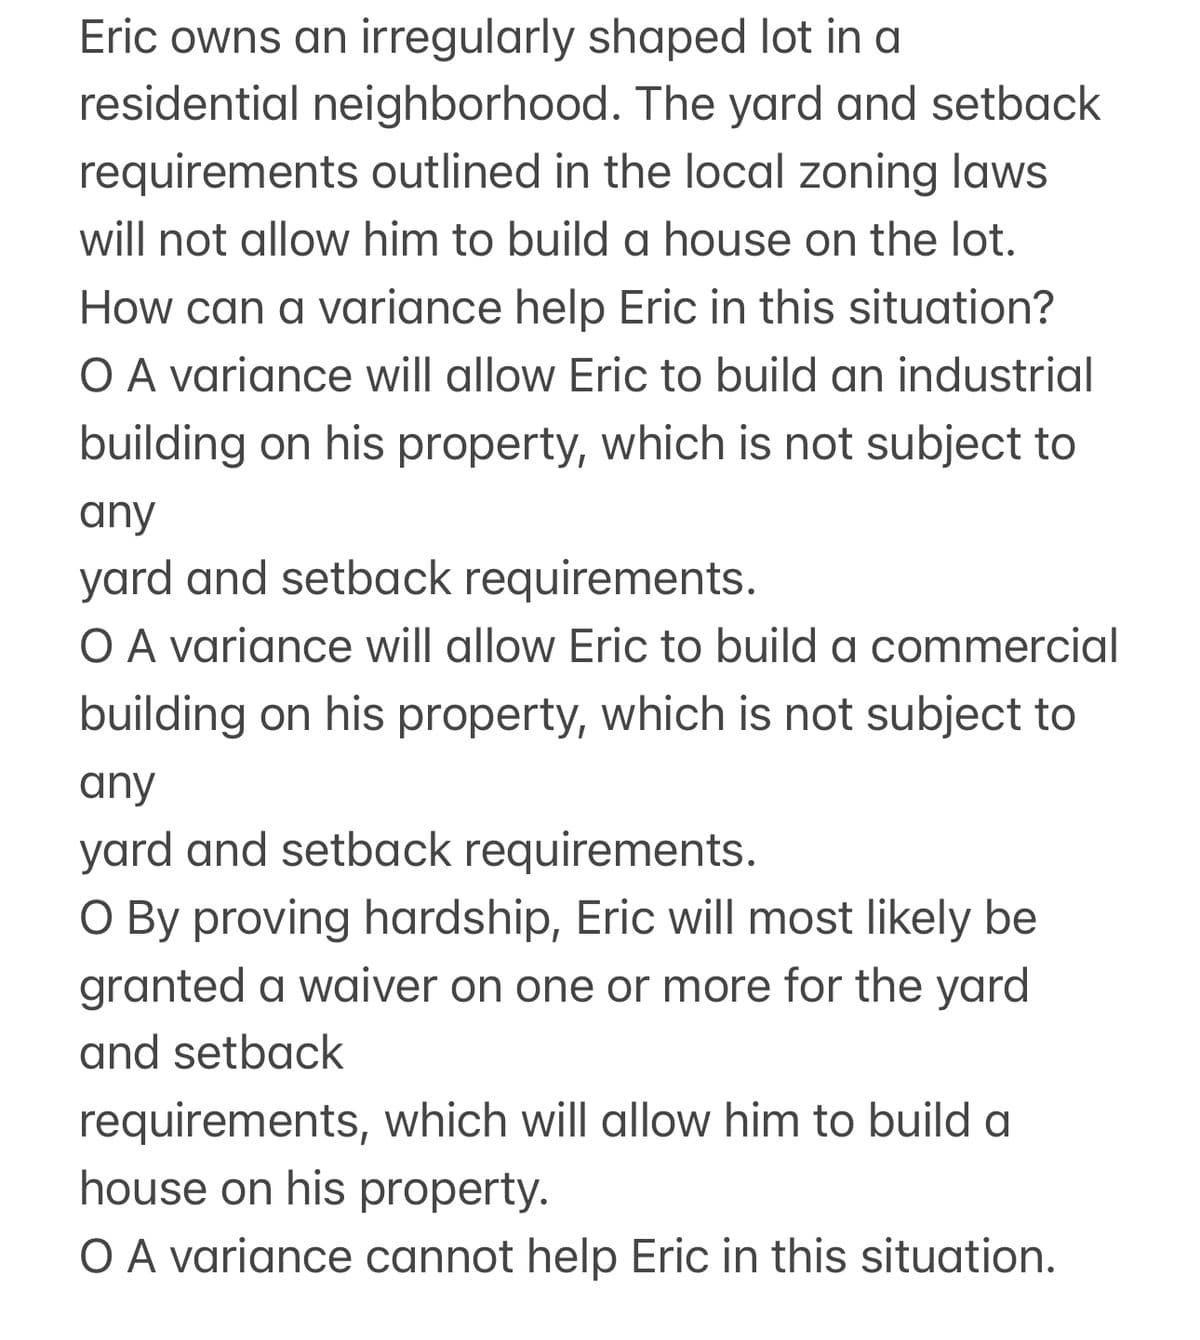 Eric owns an irregularly shaped lot in a
residential neighborhood. The yard and setback
requirements outlined in the local zoning laws
will not allow him to build a house on the lot.
How can a variance help Eric in this situation?
O A variance will allow Eric to build an industrial
building on his property, which is not subject to
any
yard and setback requirements.
O A variance will allow Eric to build a commercial
building on his property, which is not subject to
any
yard and setback requirements.
O By proving hardship, Eric will most likely be
granted a waiver on one or more for the yard
and setback
requirements, which will allow him to build a
house on his property.
O A variance cannot help Eric in this situation.